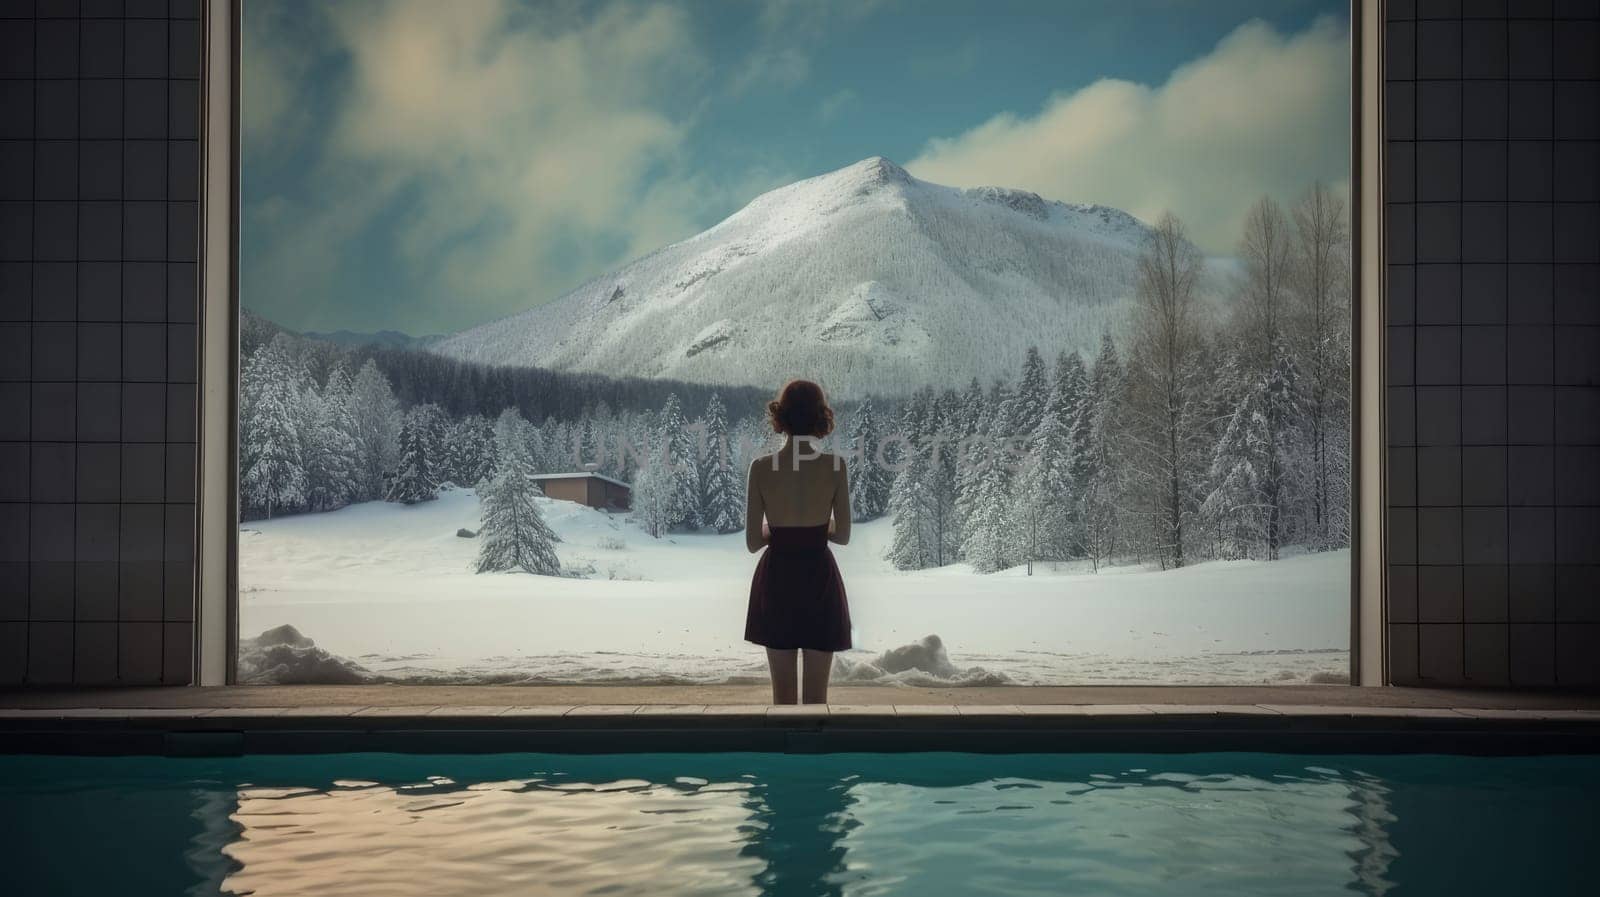 A girl and a pool among the snow in an ecological chalet hotel at an alpine ski resort overlooking a snowy landscape and mountains. Concept of traveling around the world, recreation, winter sports, vacations, tourism in the unusual places.